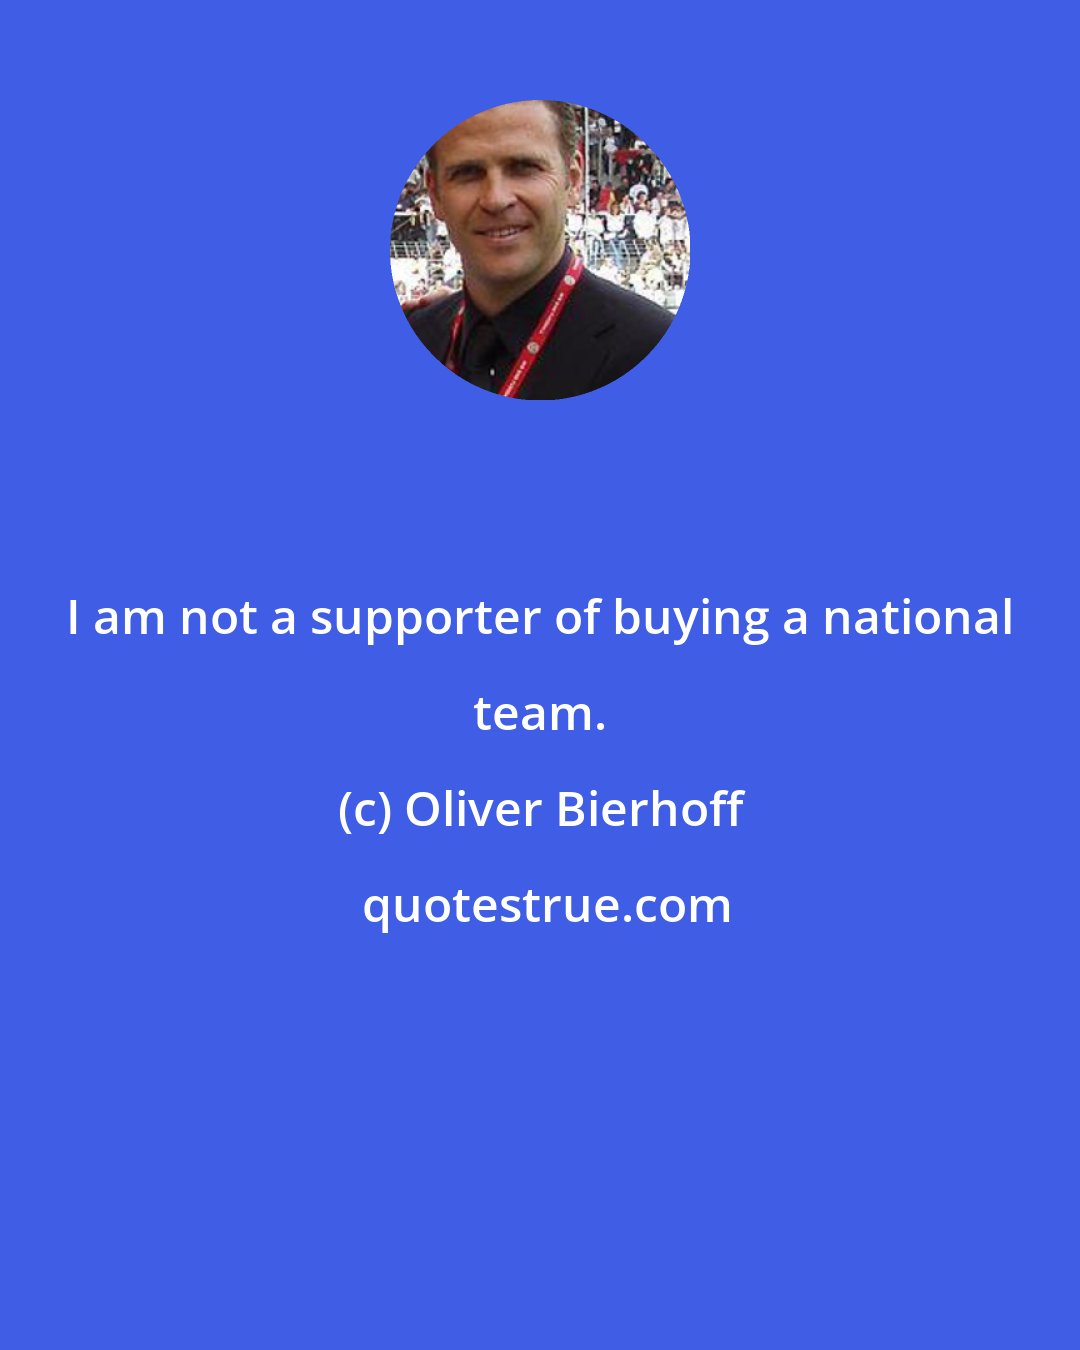 Oliver Bierhoff: I am not a supporter of buying a national team.